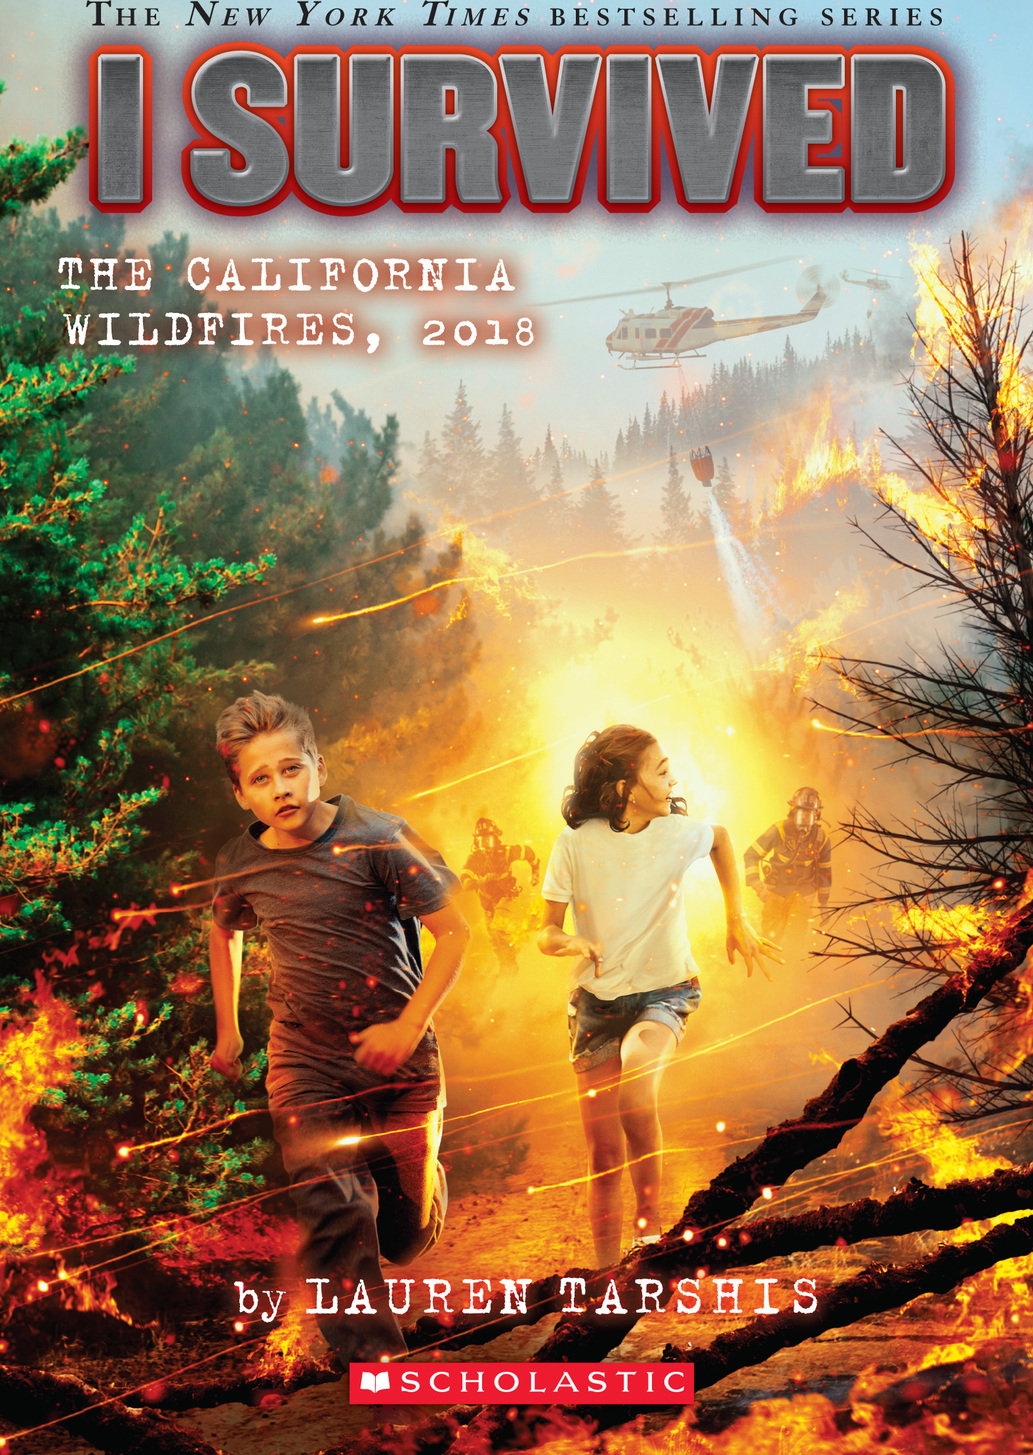 I Survived The California Wildfires, 2018 (I Survived #20) - Scholastic